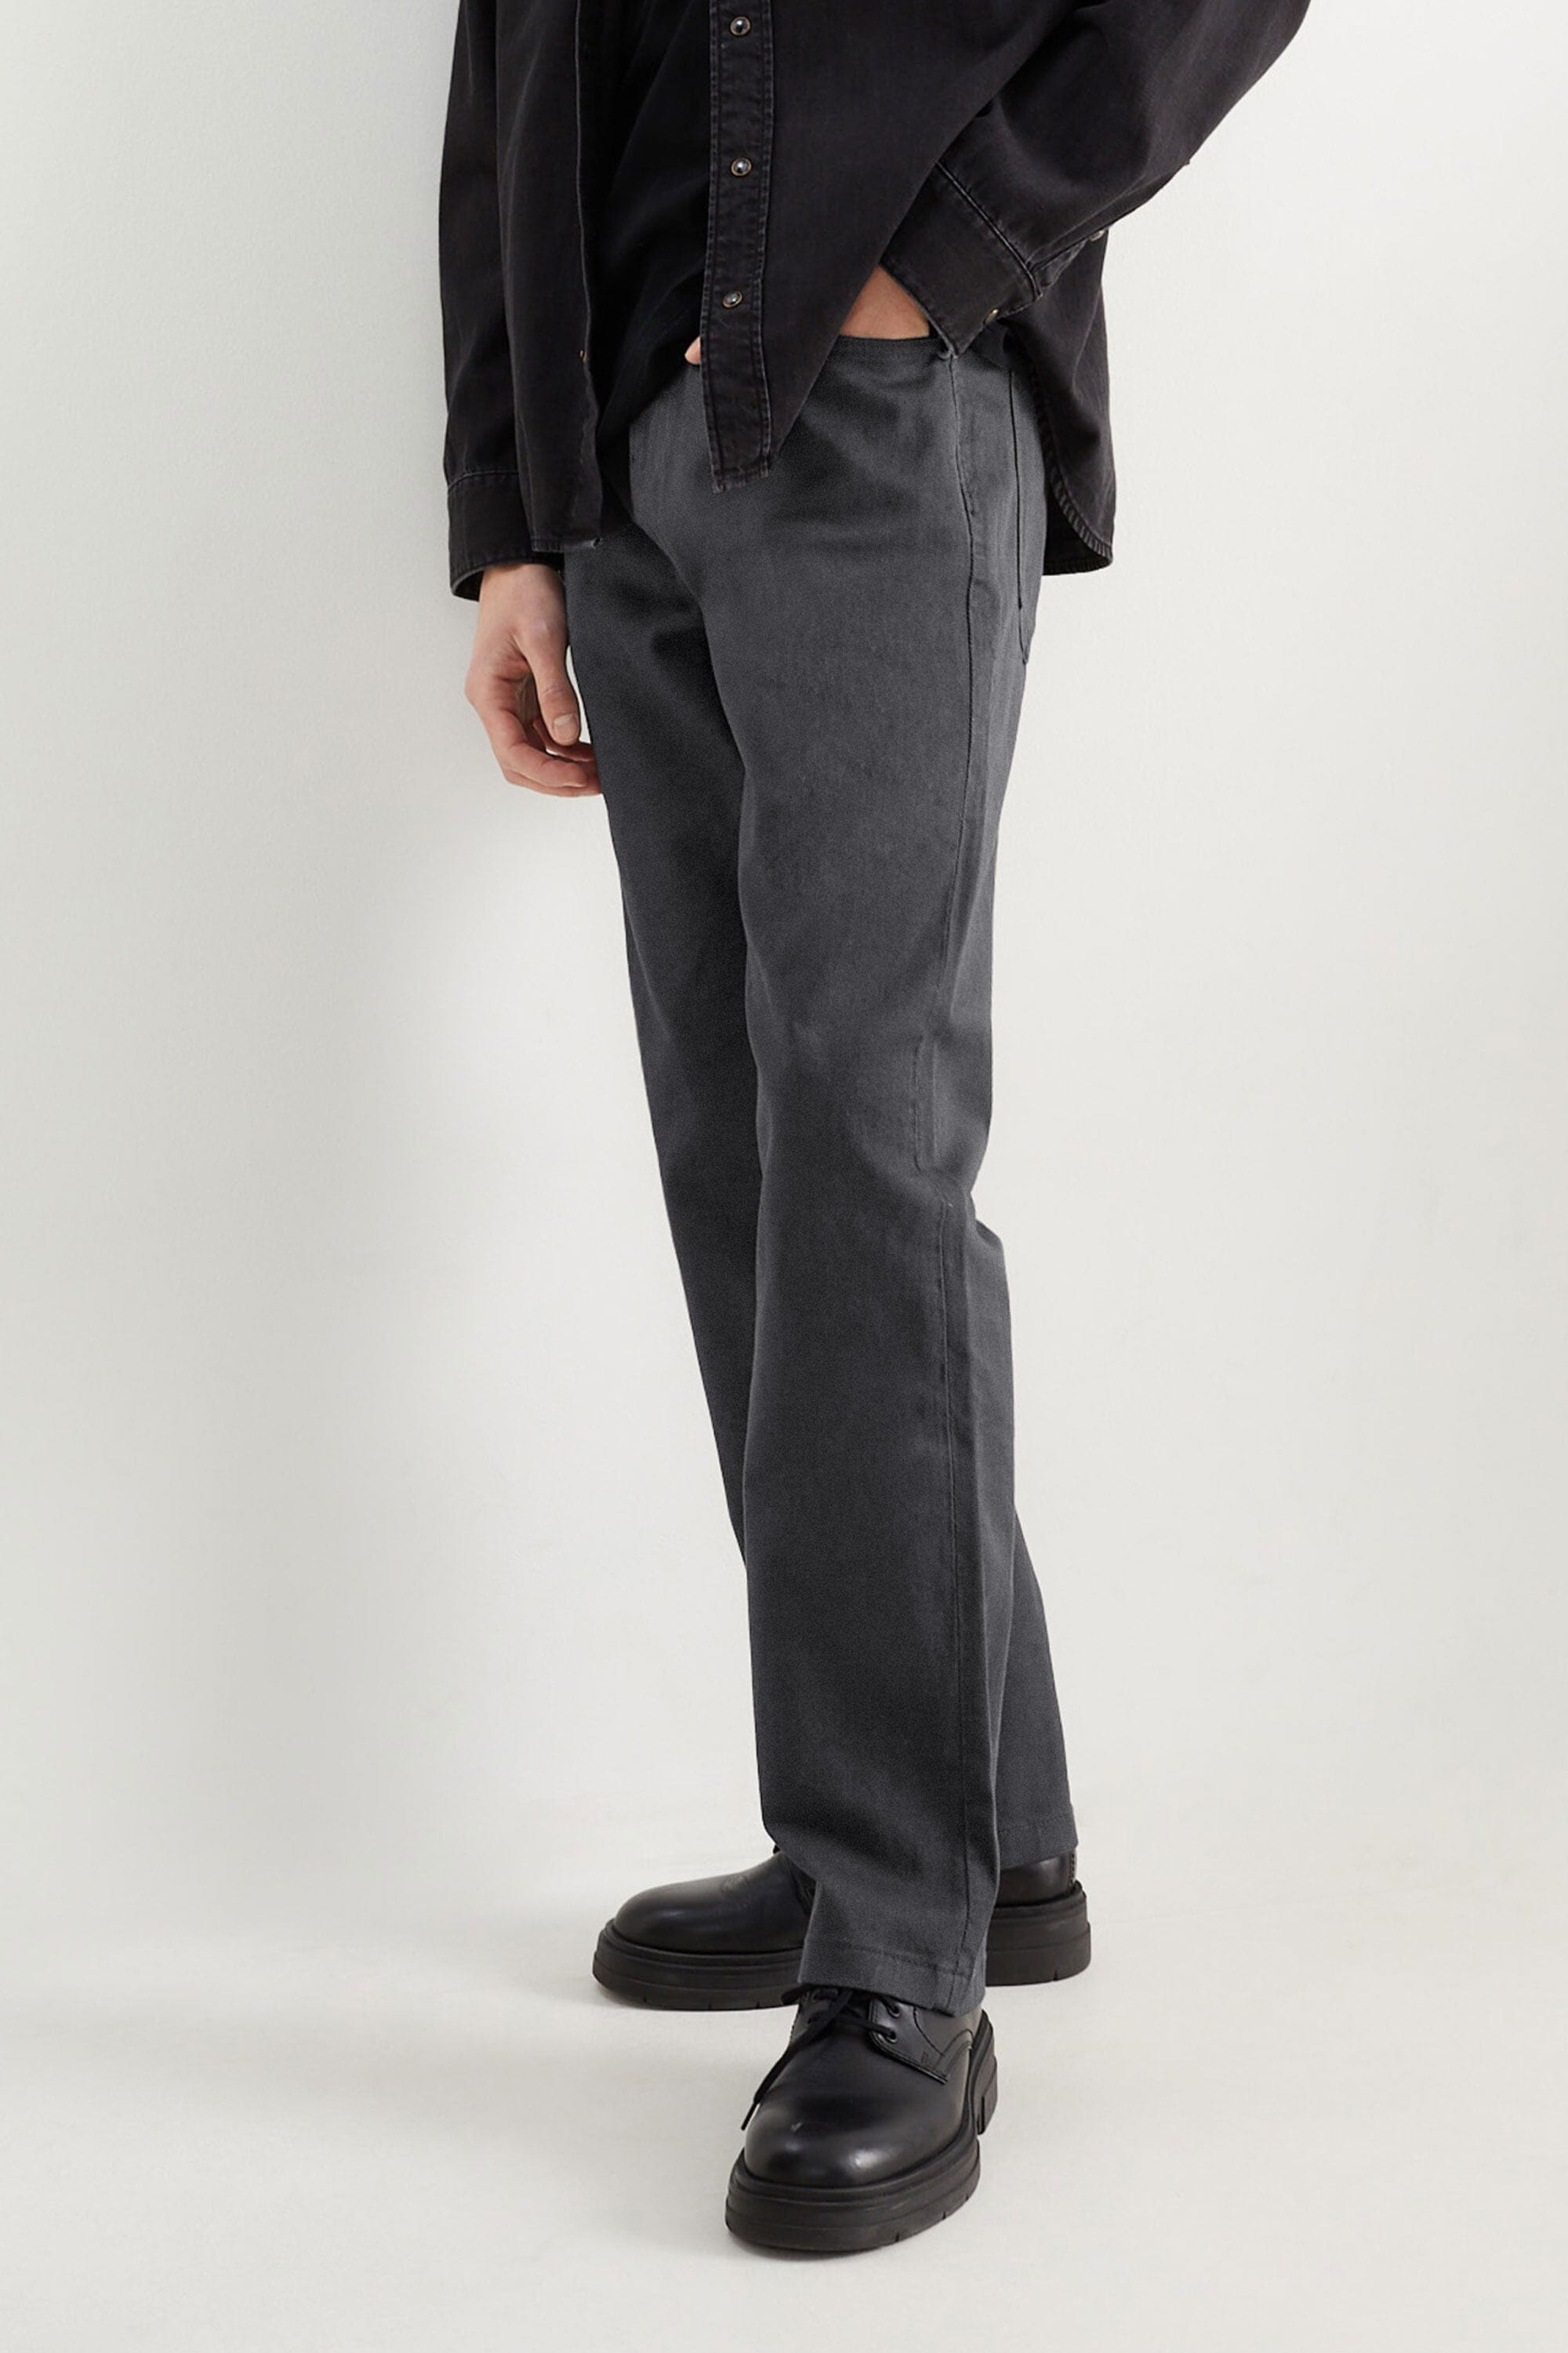 Men's Formal 4 way Stretch Trousers in Charcoal Grey Slim Fit